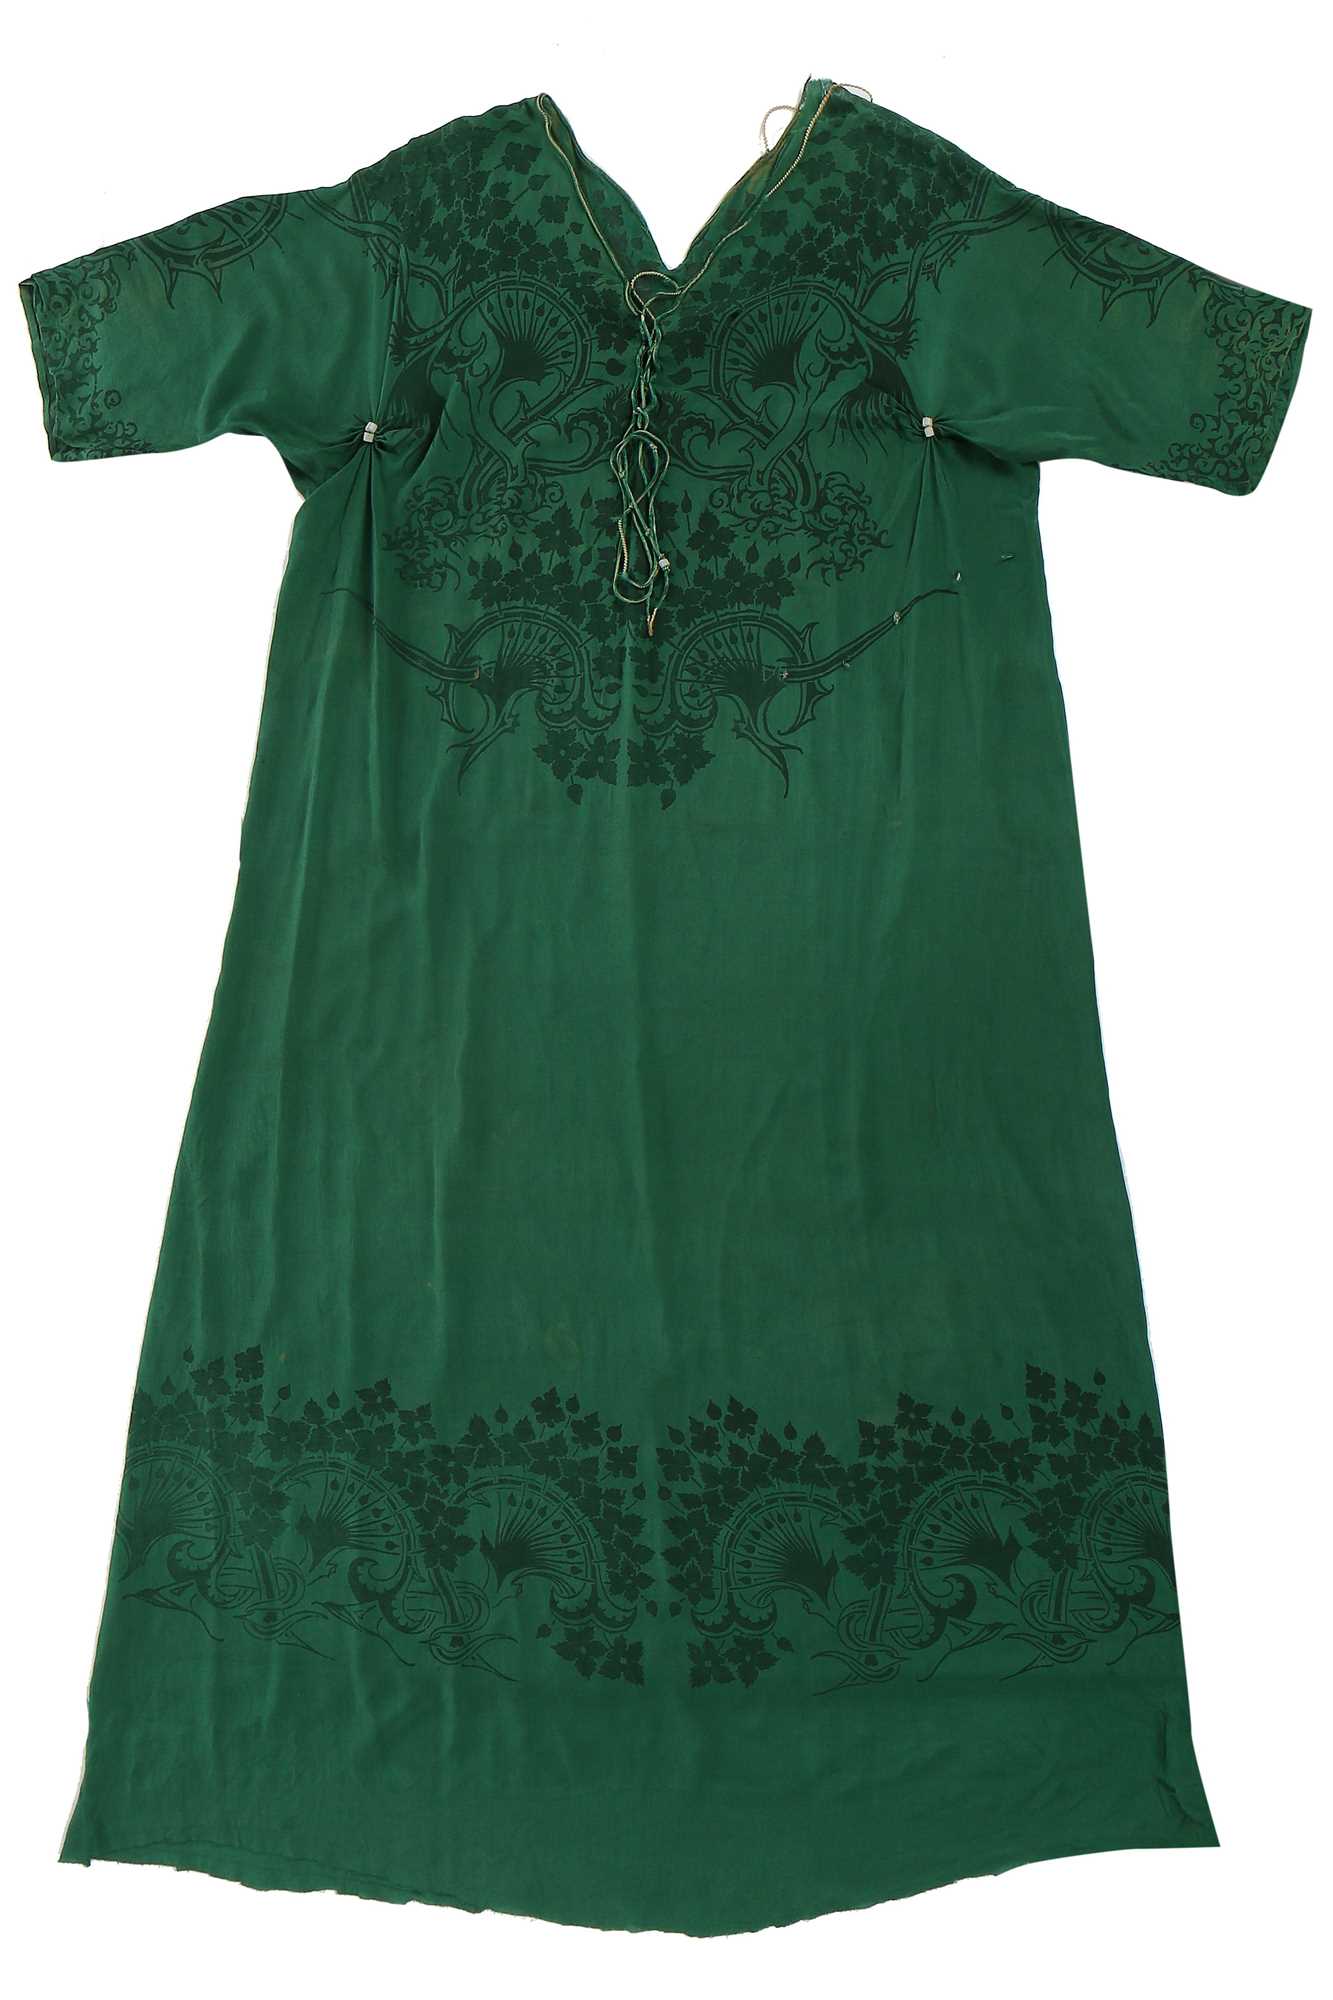 Lot 59 - A Mariano Fortuny stencilled silk dress, 1920s-30s